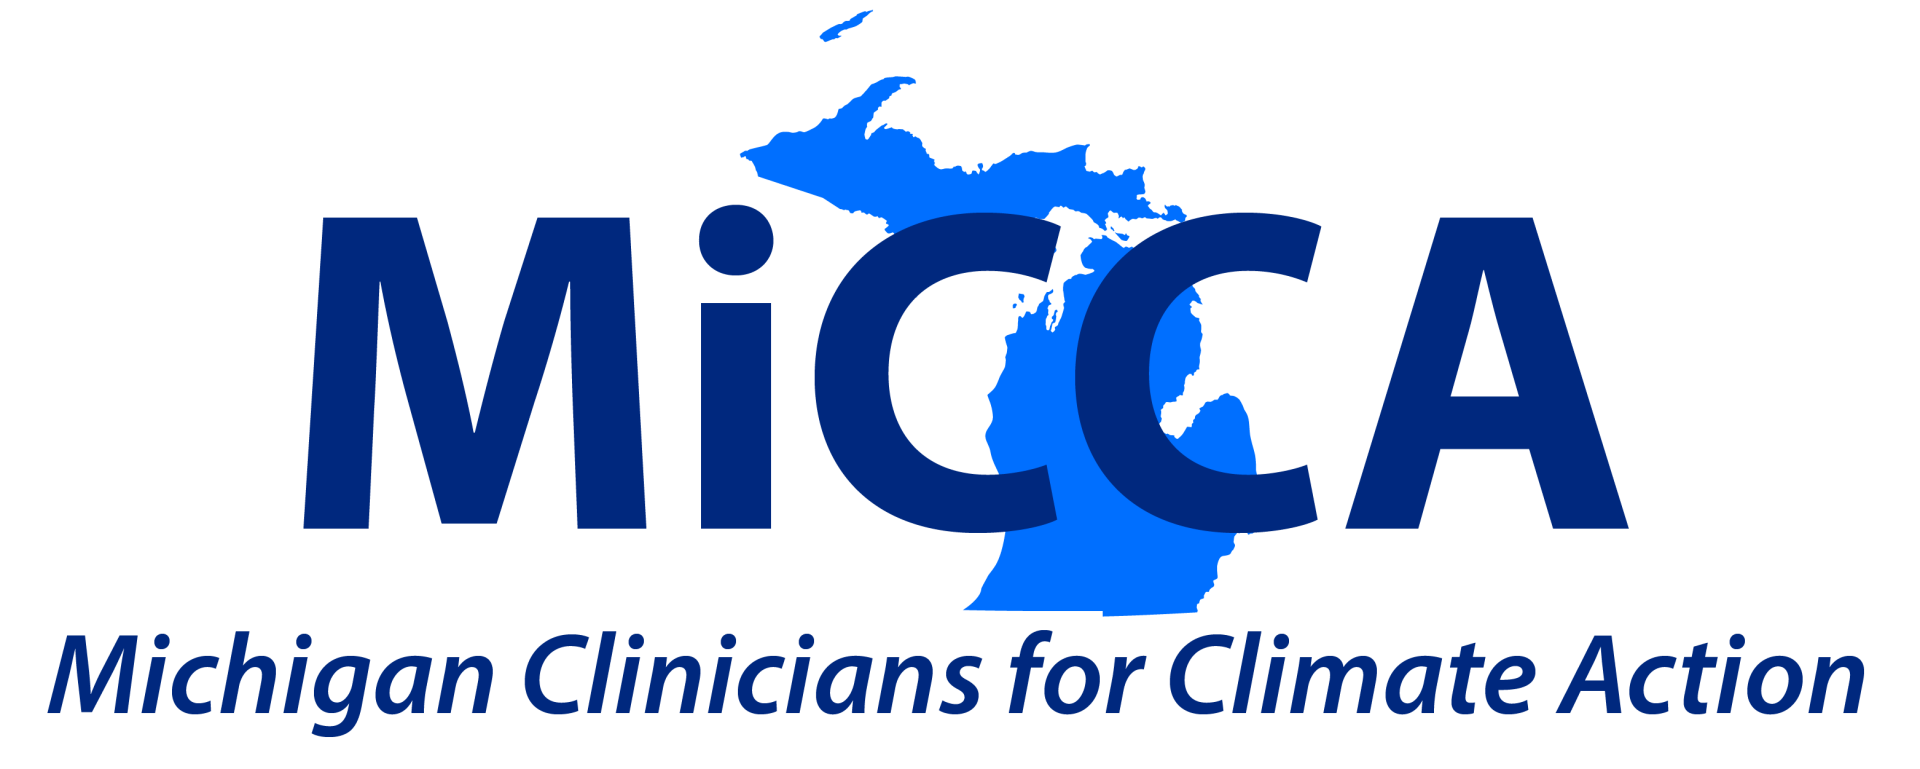 This image is the logo for MiCCA: Michigan Clinicians for Climate Action